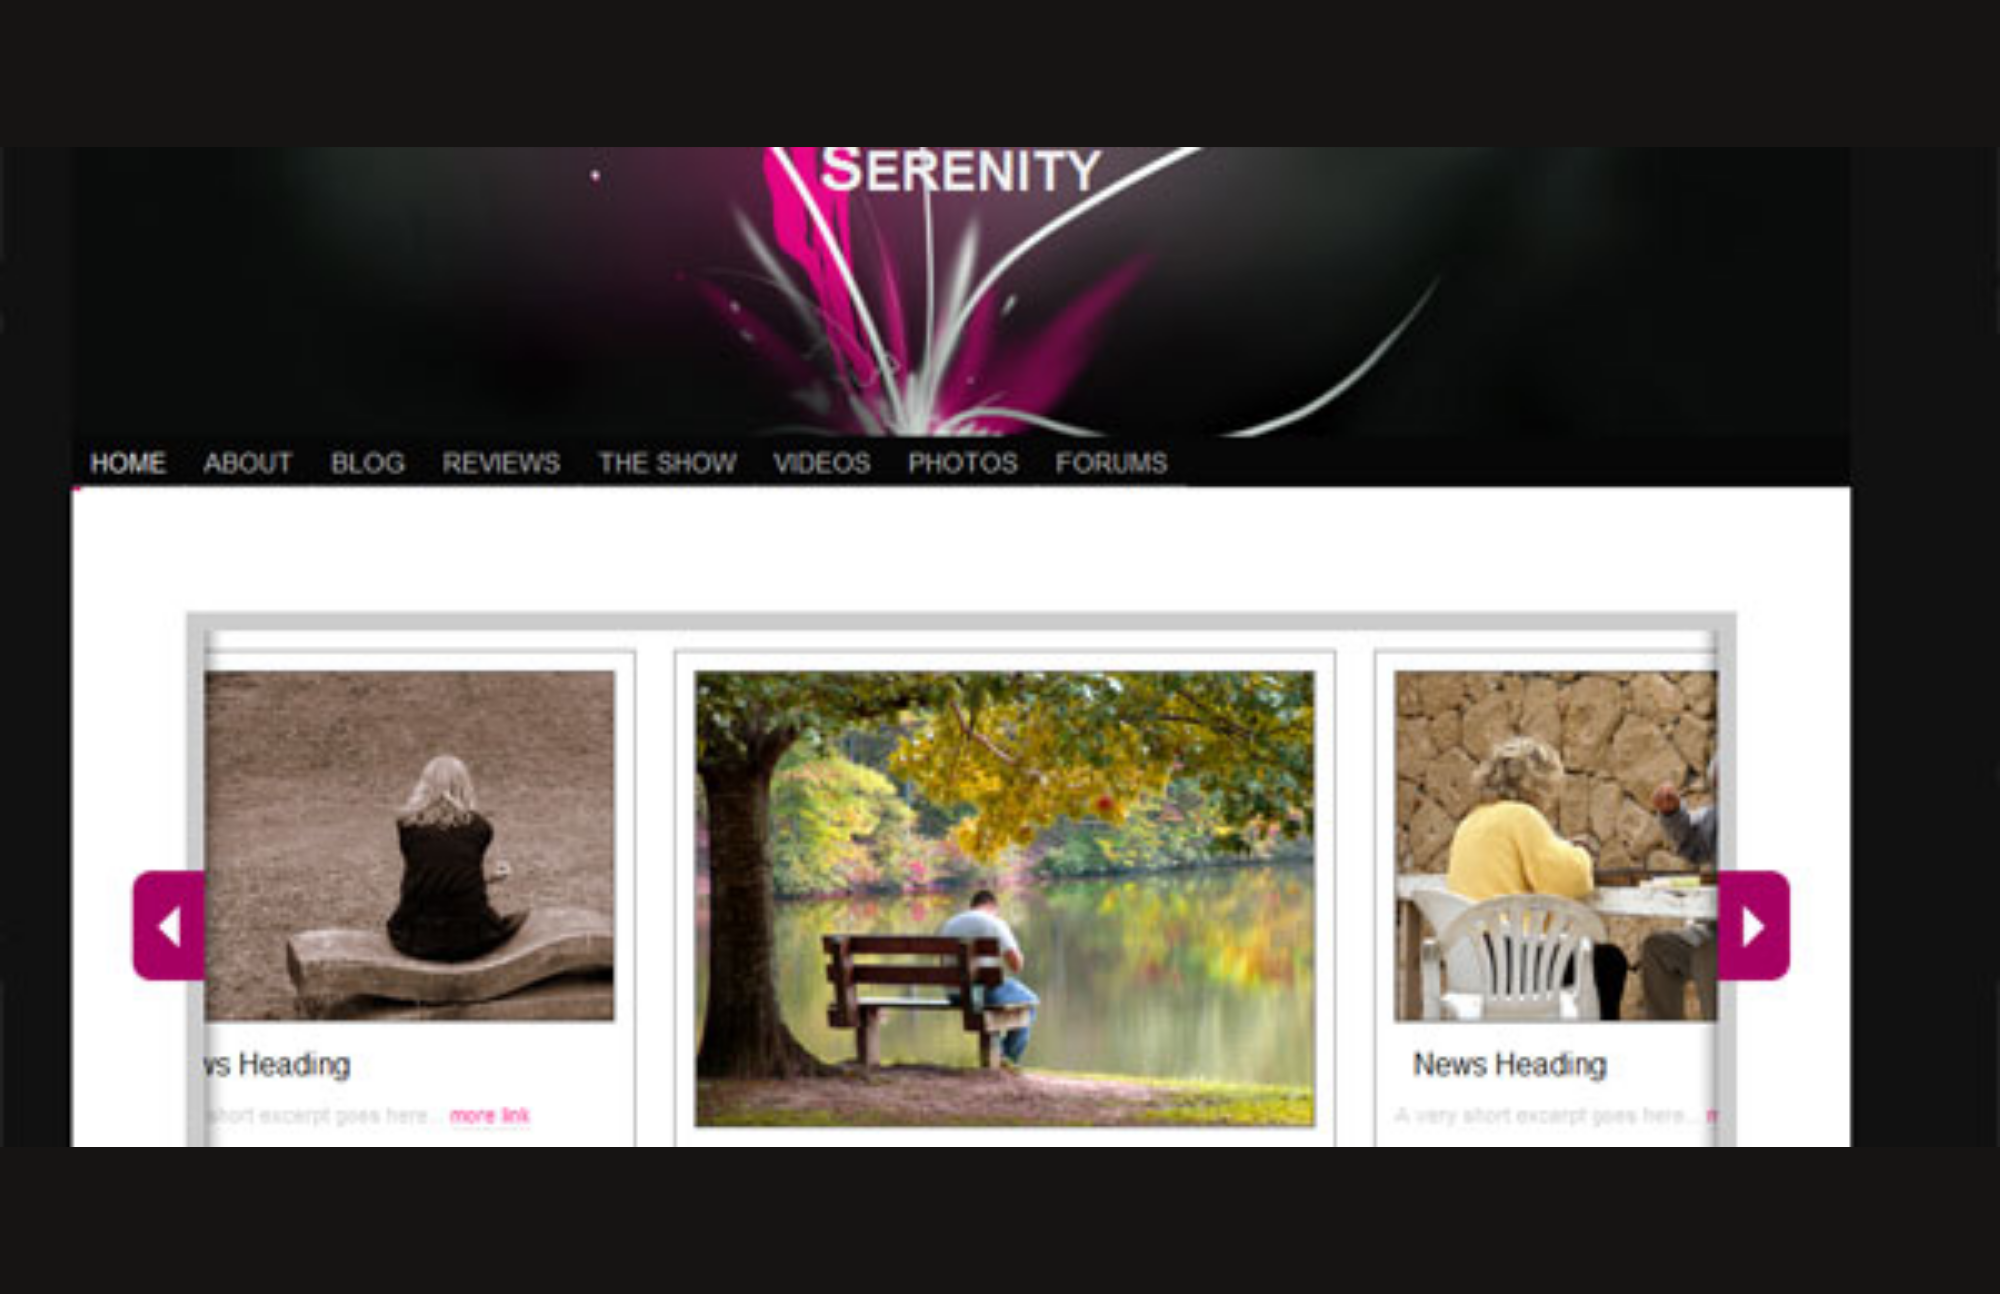 Serenity HTML5 And CSS3 Template - A Highly Recommended Template For Digital Marketers